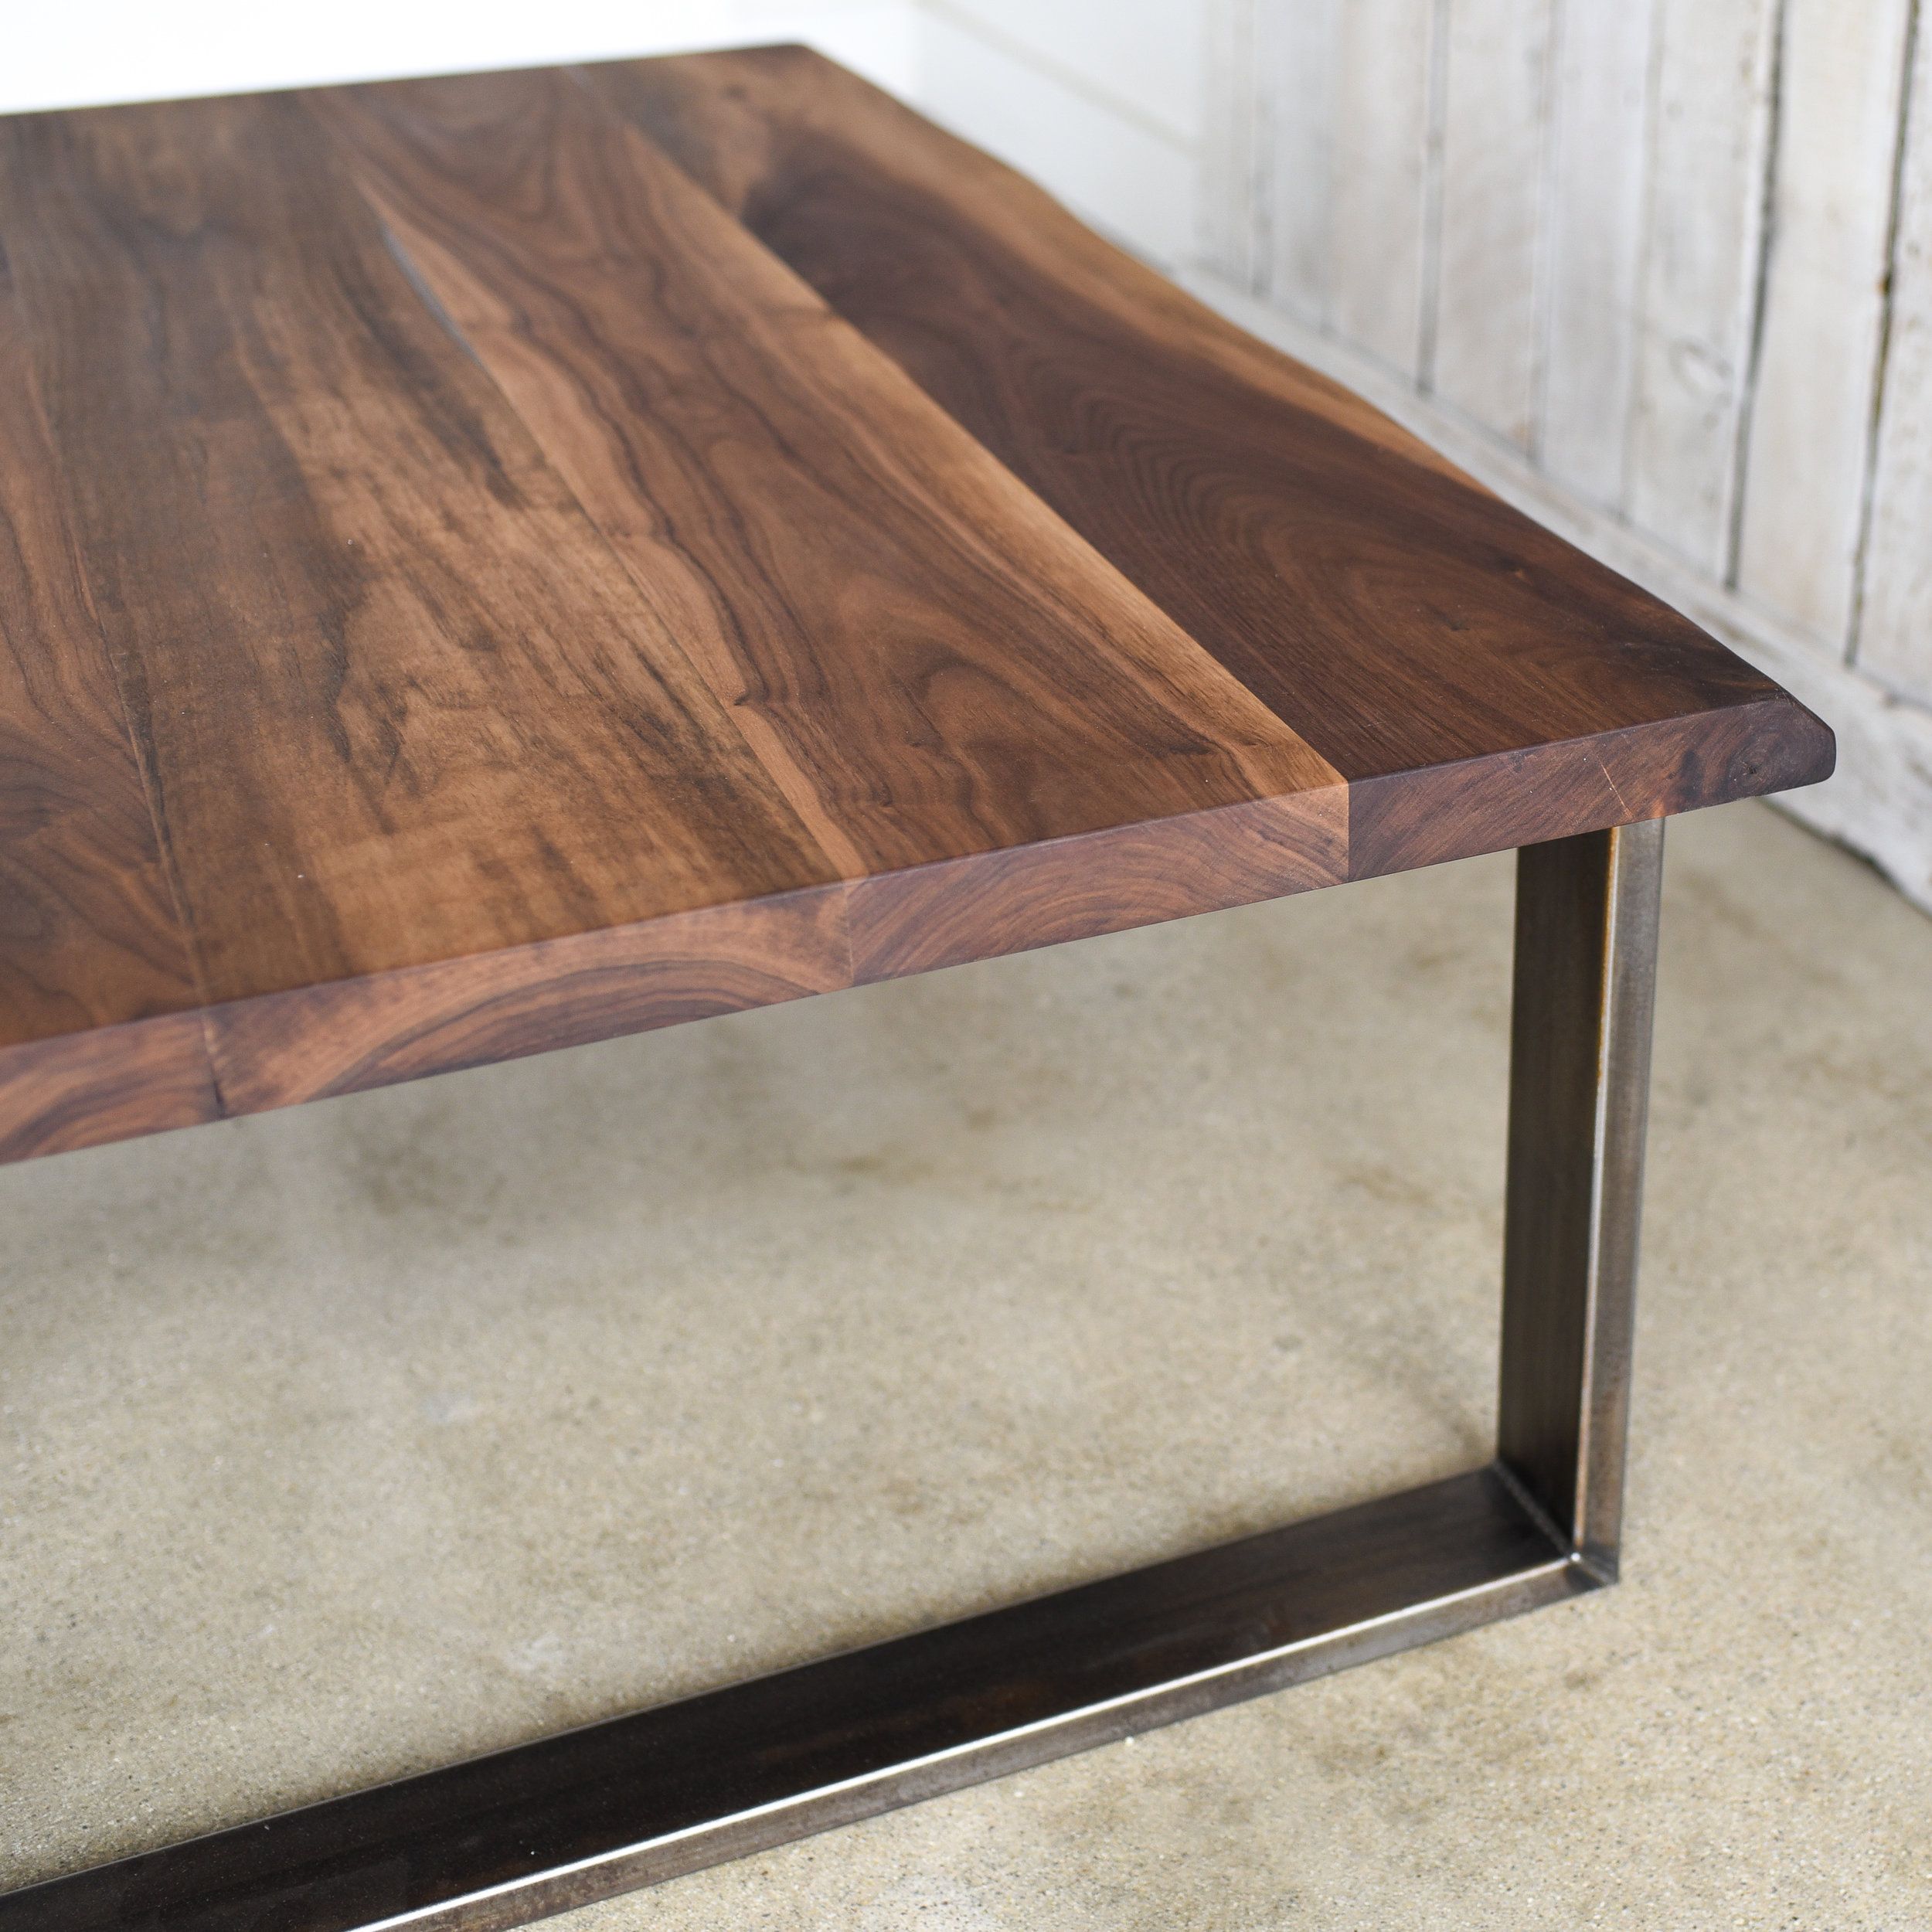 Walnut Live Edge Coffee Table / Industrial U Shaped Steel Pertaining To Hand Finished Walnut Coffee Tables (View 2 of 15)